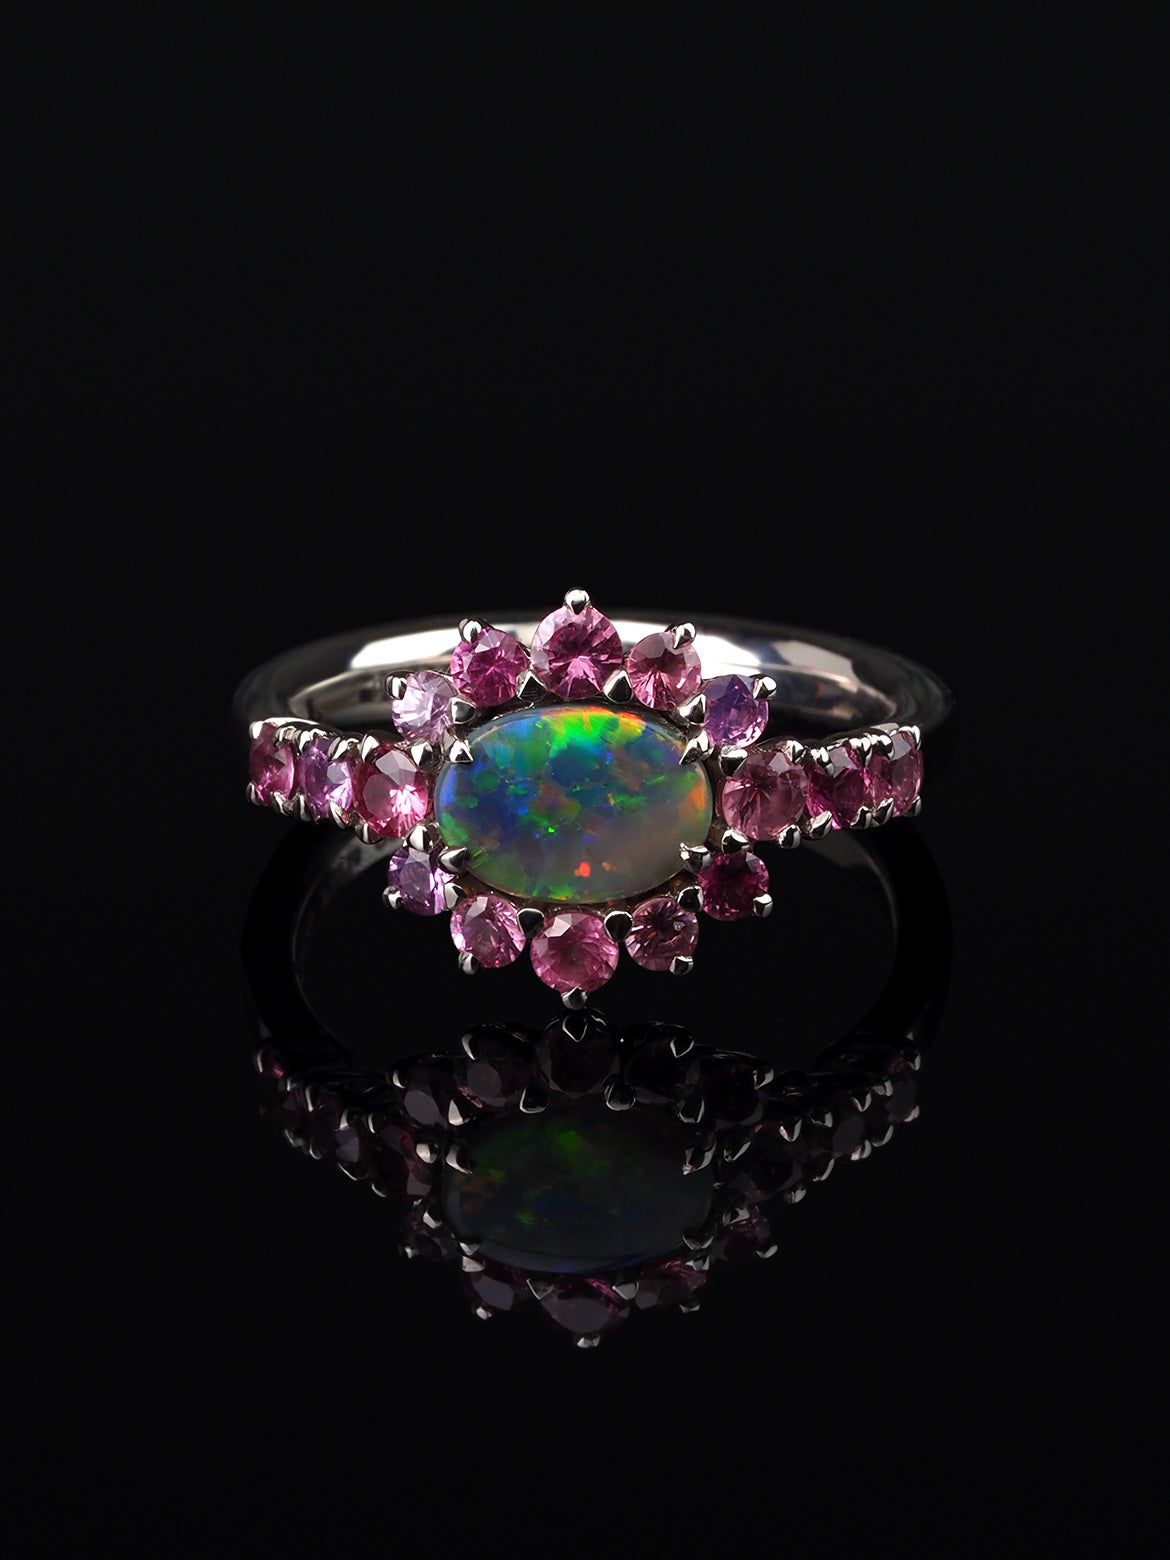 This contemporary custom made engagement/promise ring features a unique interplay of naturally beautiful gemstones. An Australian Opal is securely prong set sideways in the center, exhibiting an incredible play-of-color rainbow. This hand-selected